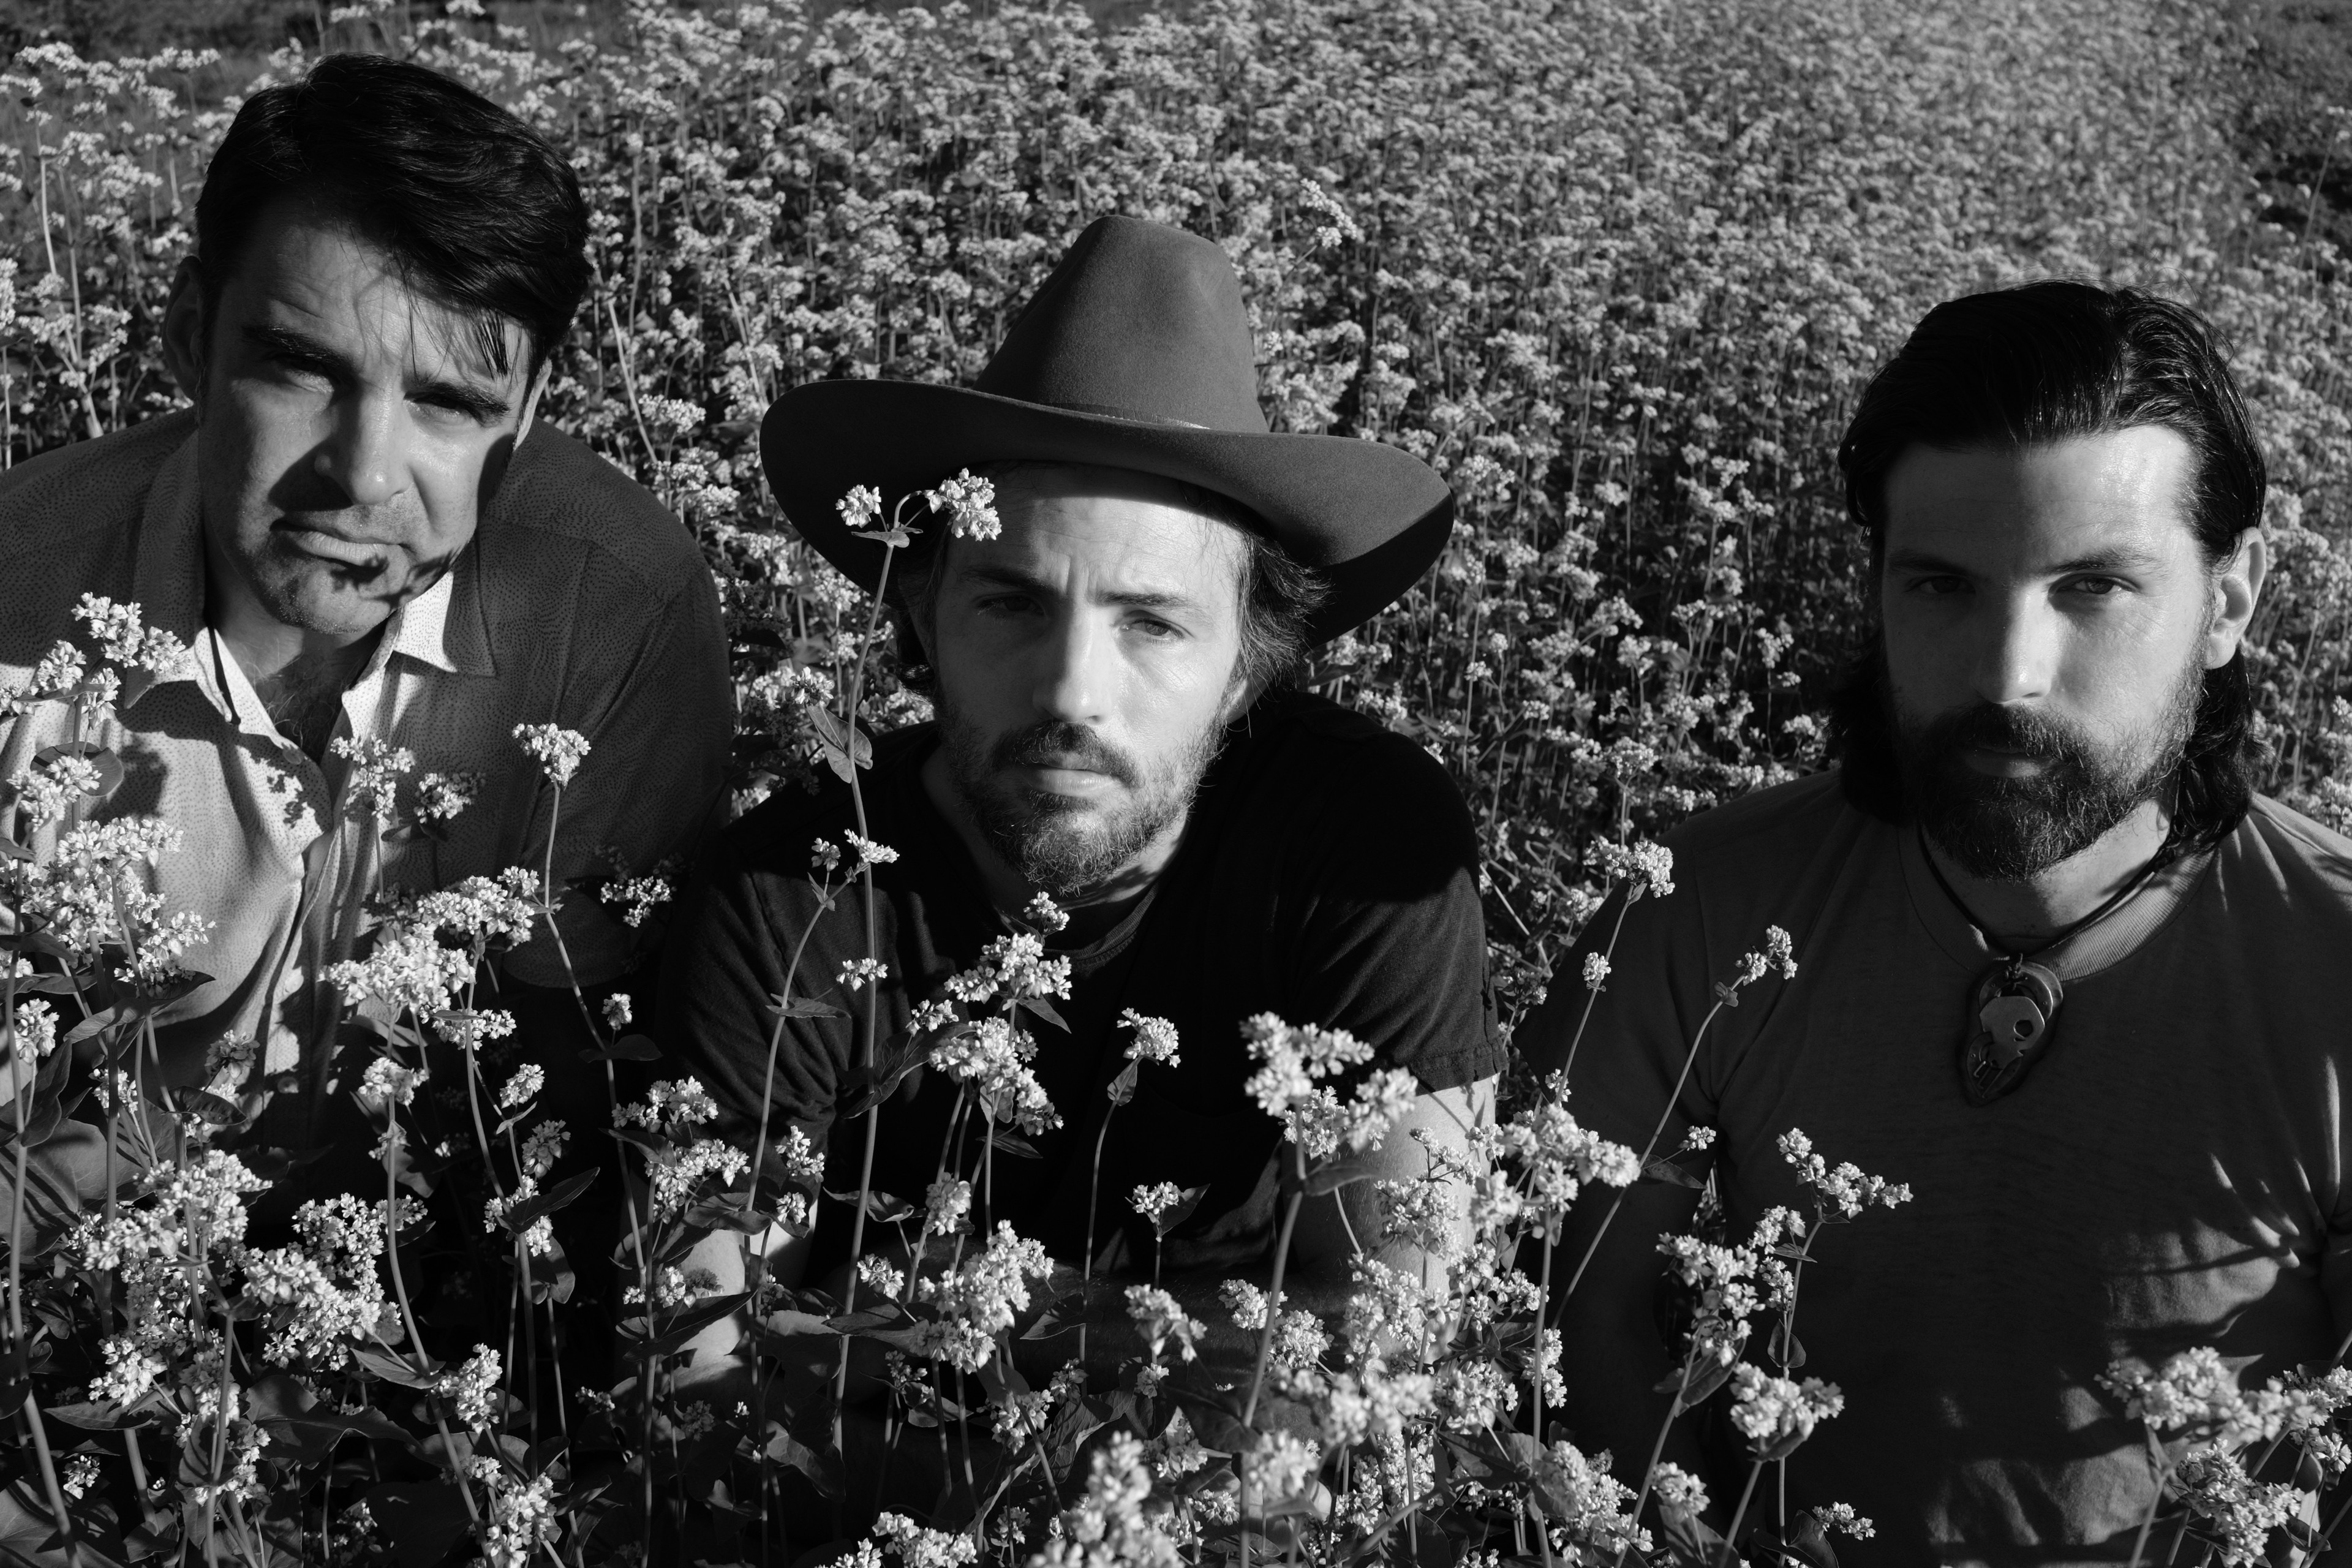 Avett Brothers Come Up With a Glimmer Through a Gleam